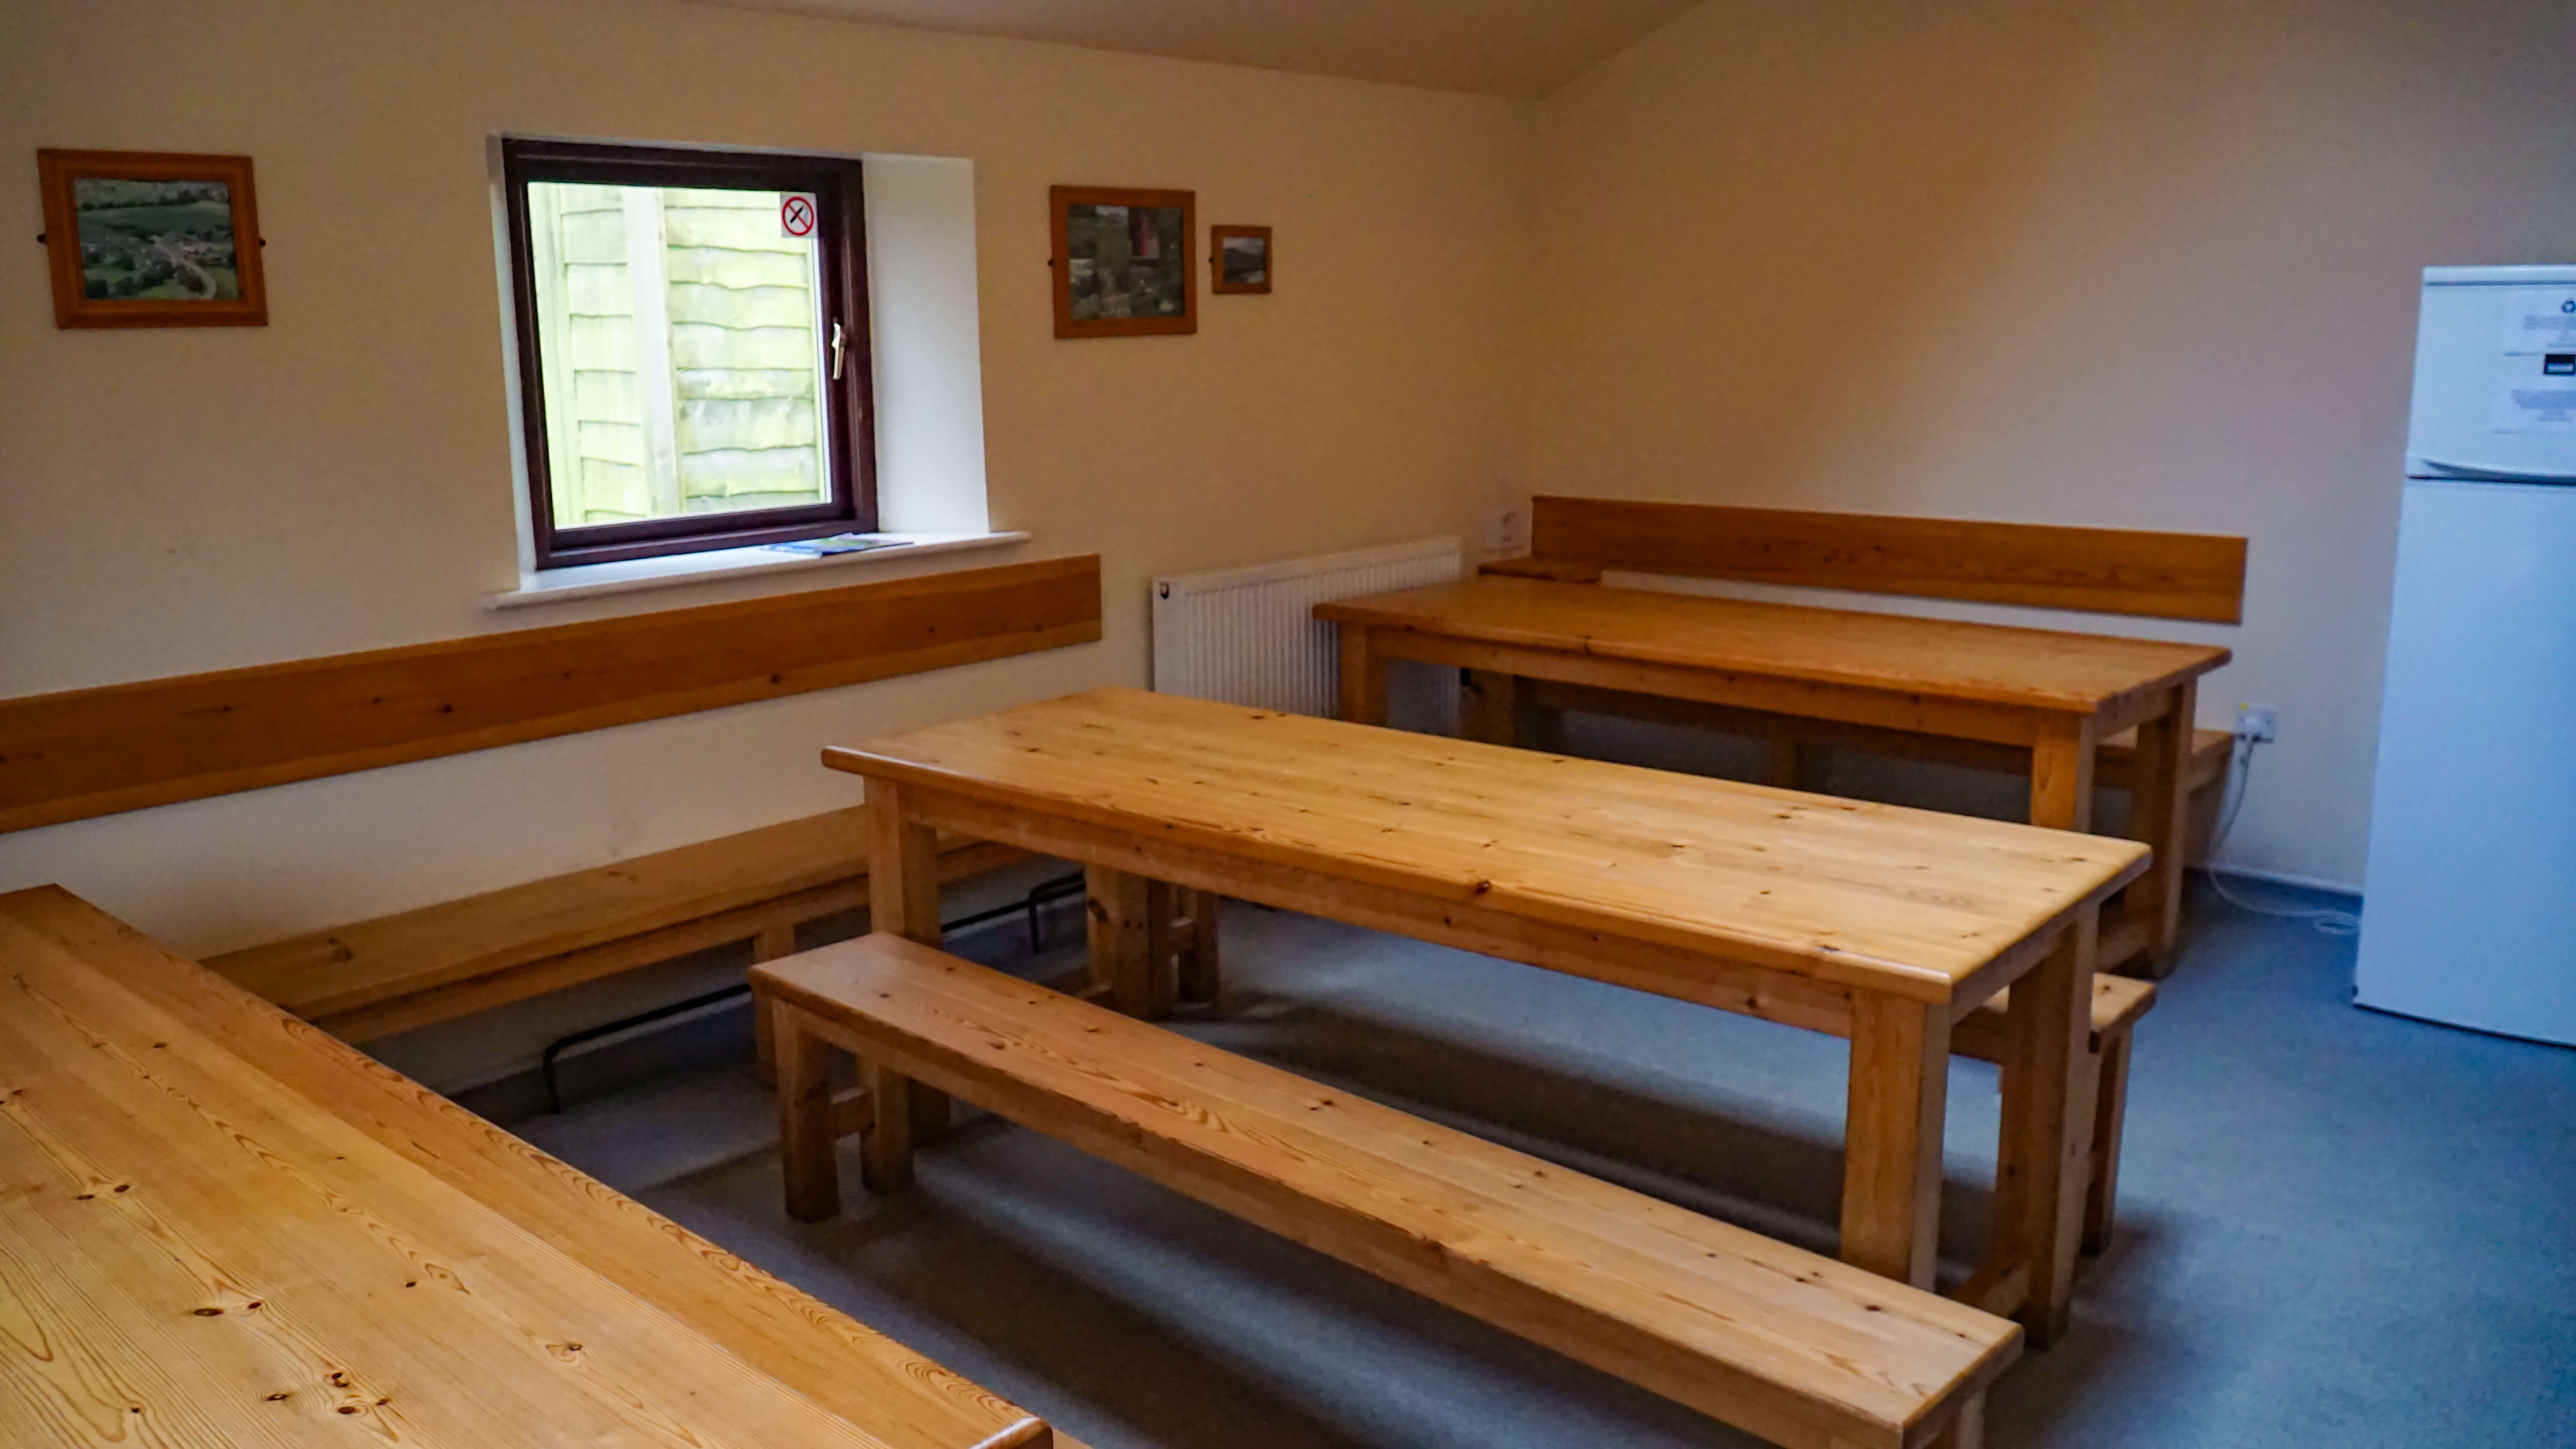 3 Peaks Bunkroom - dining tables and benches allow a large group to eat together